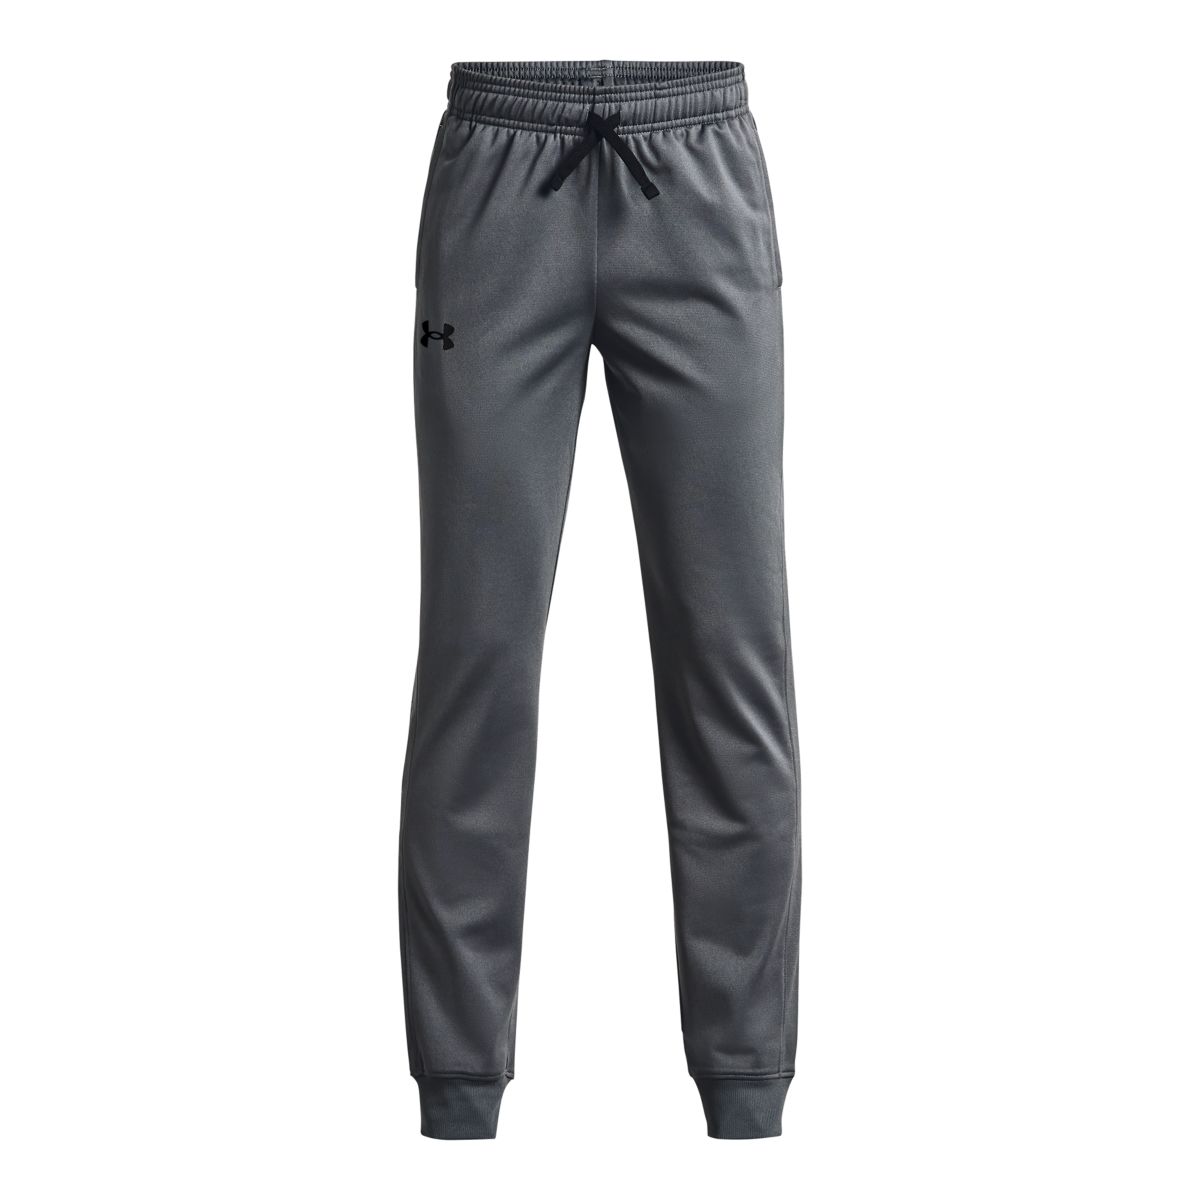 Under Armour Boys Brawler 2.0 Tapered Pants Pant